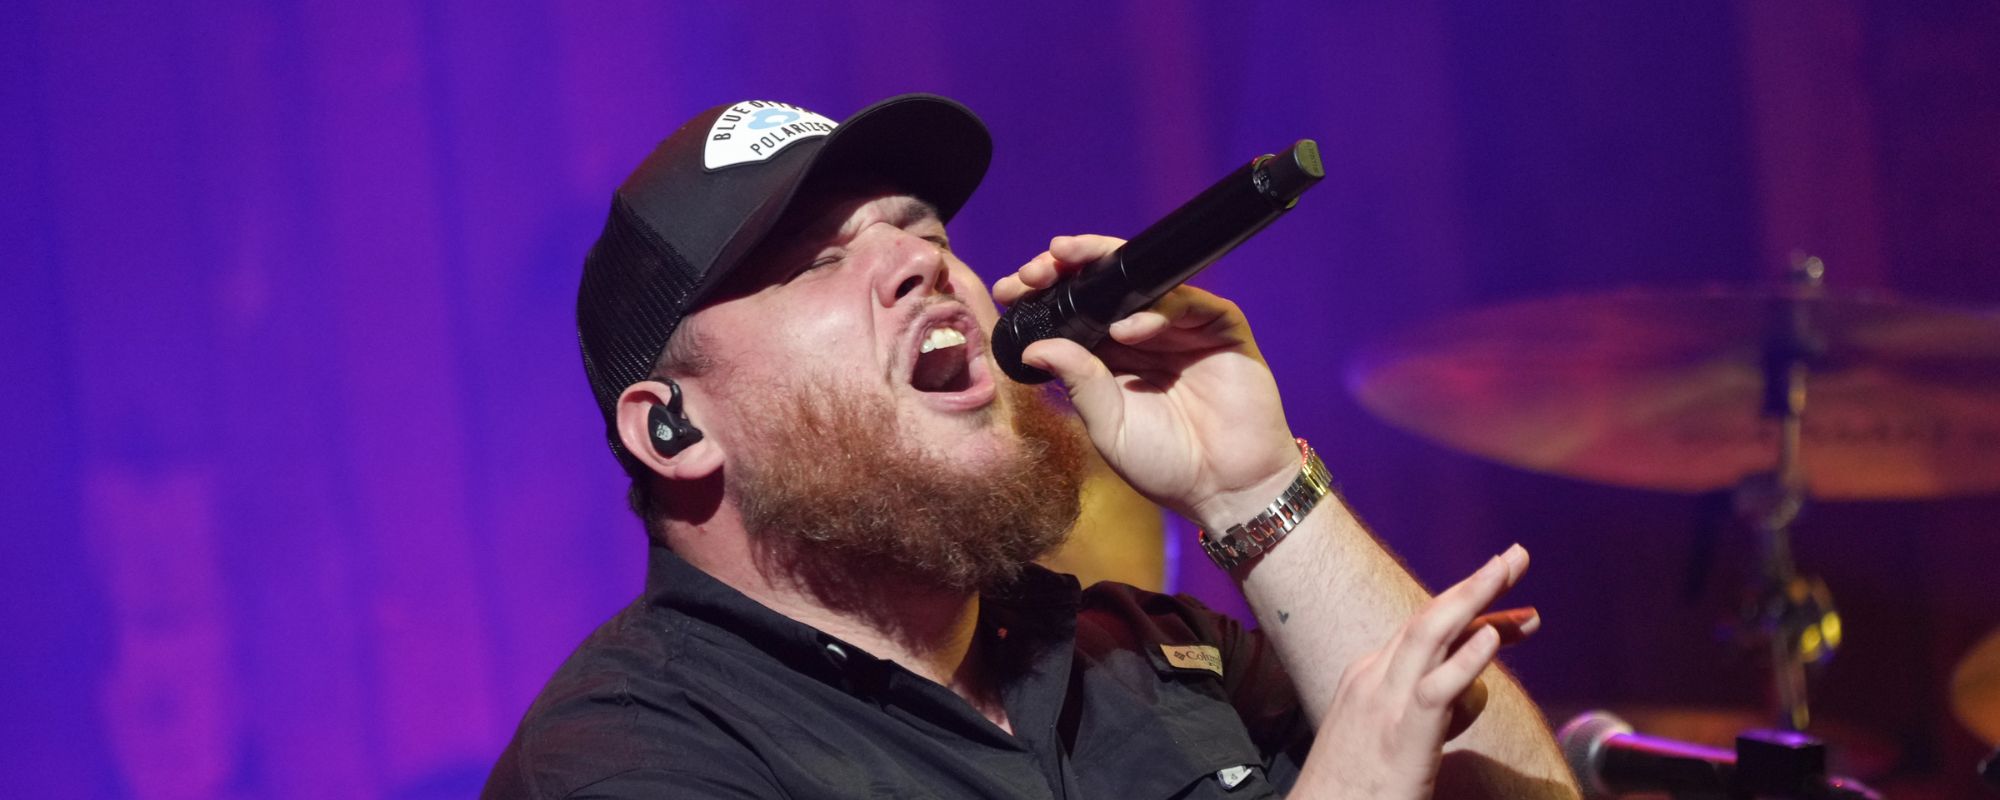 Luke Combs Makes $100K Donation to 12-Year-Old Fan Who Beat Cancer, Plays Her Favorite Song